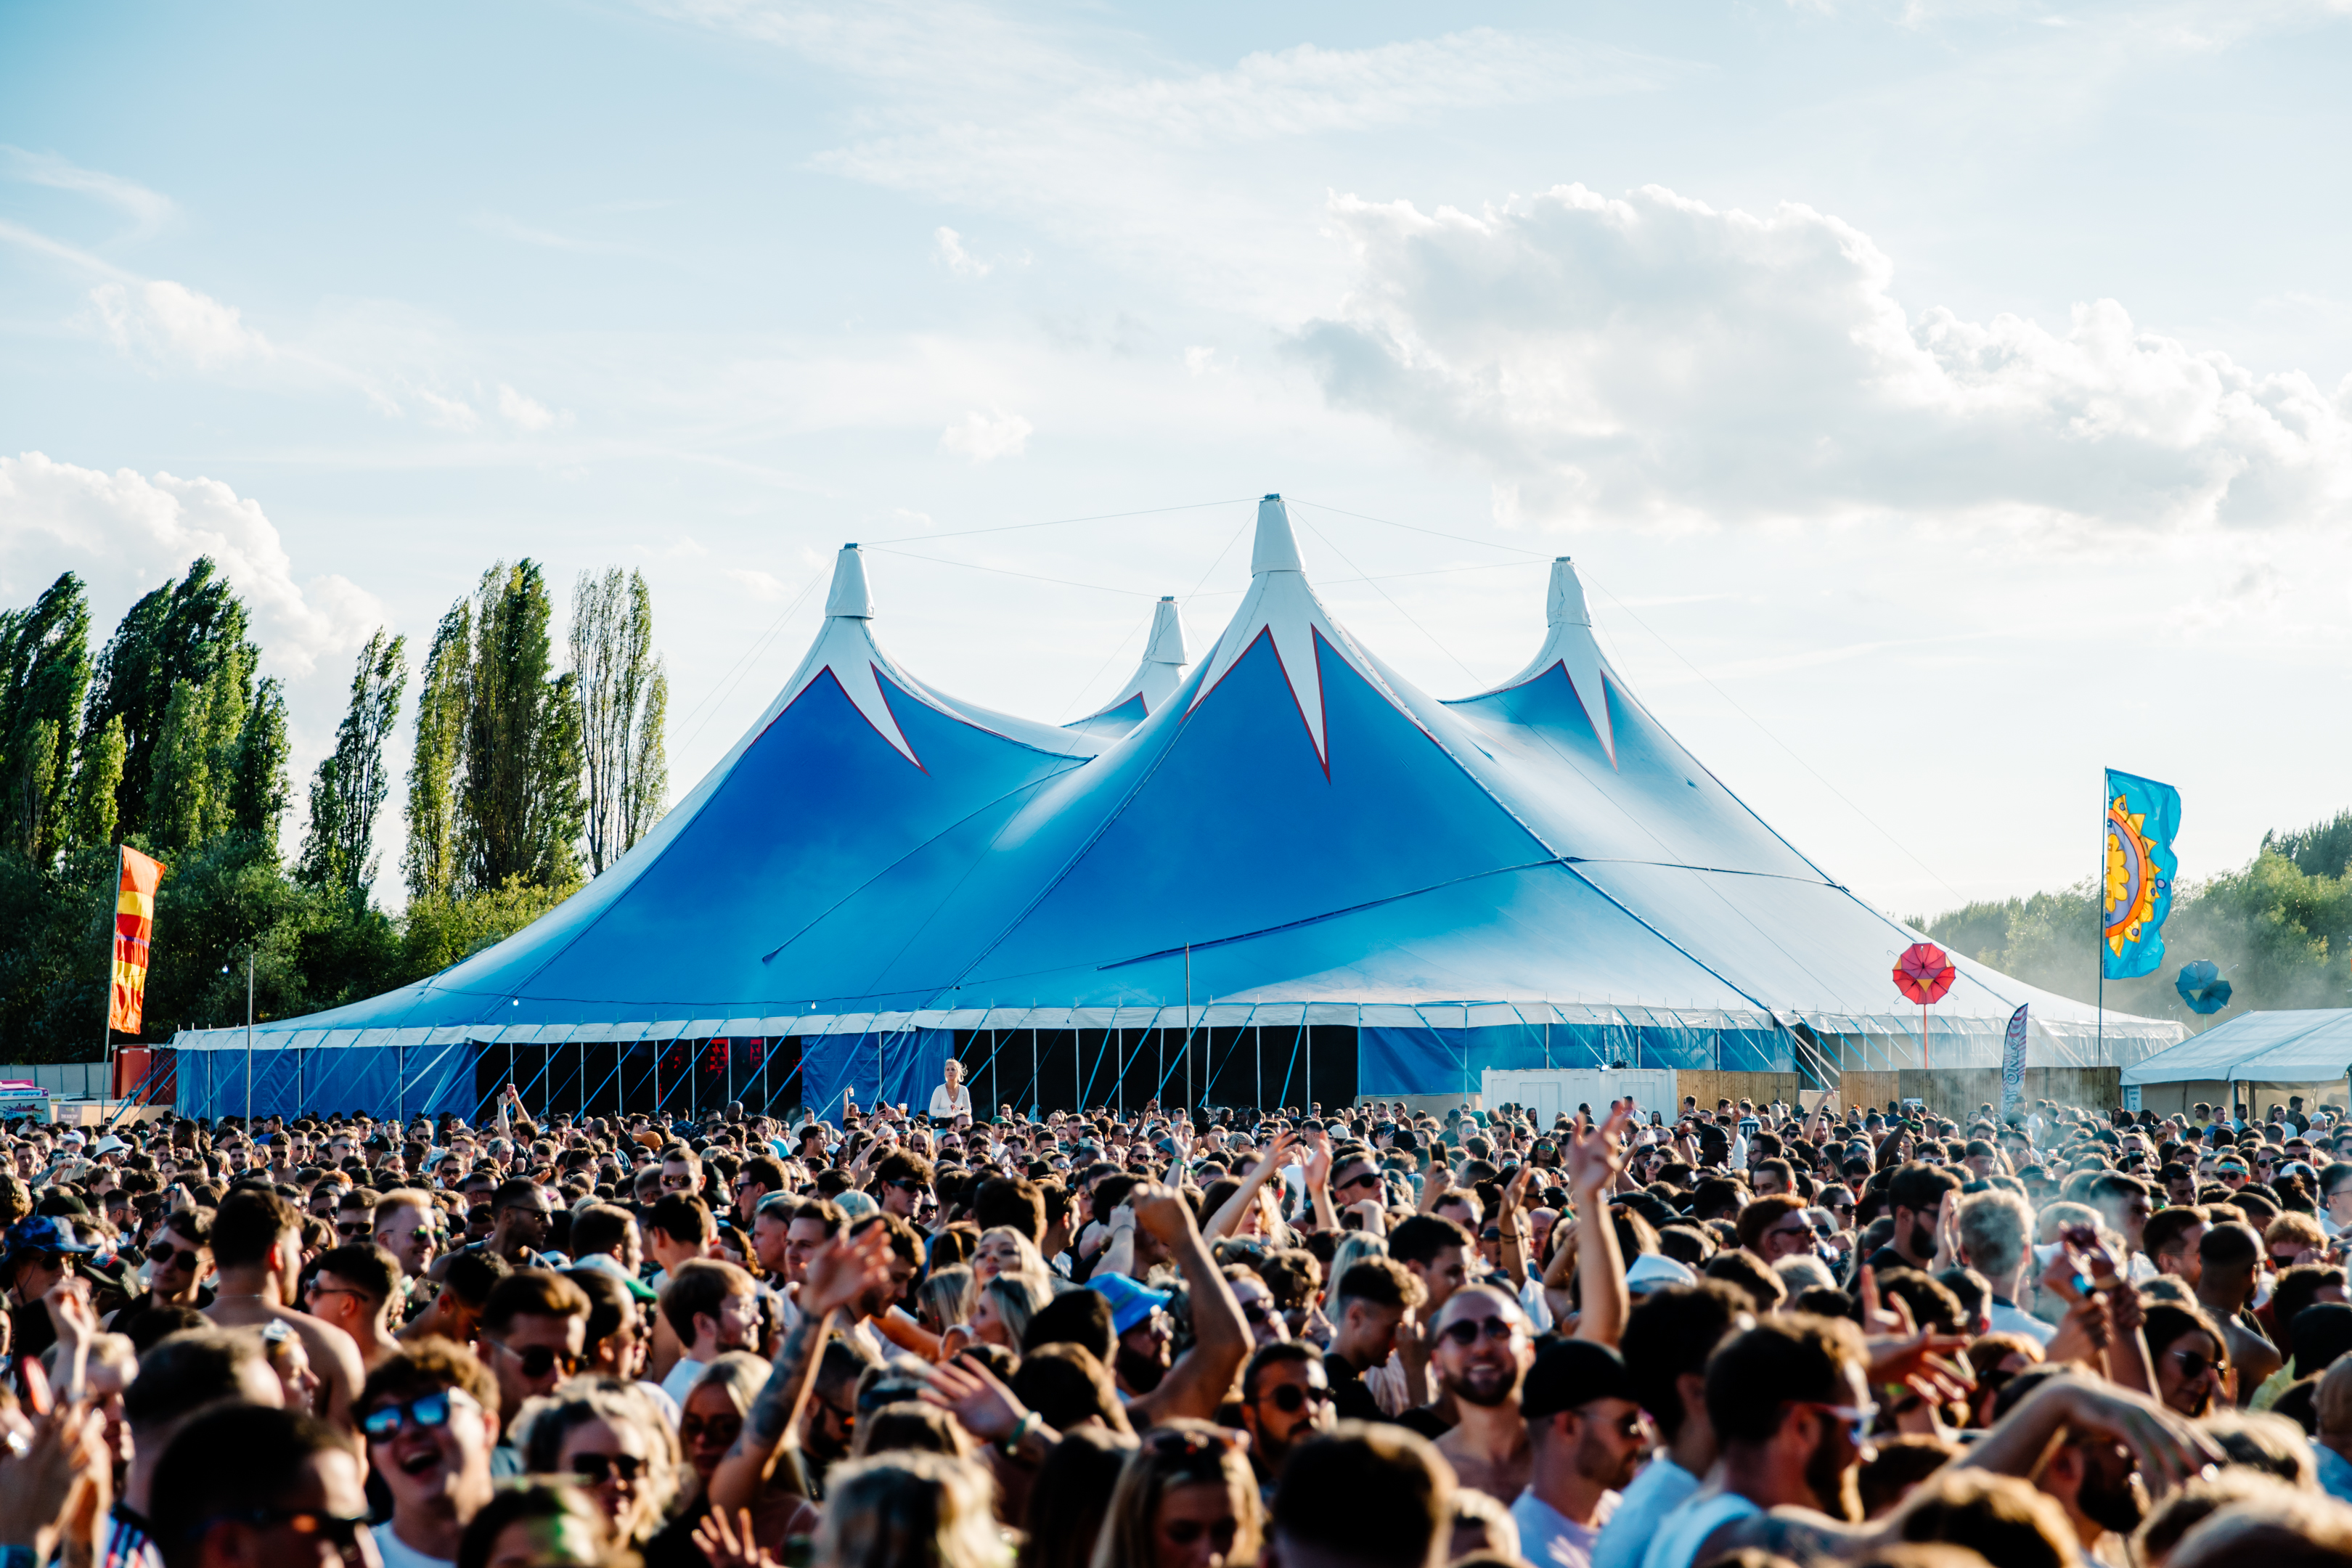 The Big Top Stage at Eastern Electrics festival